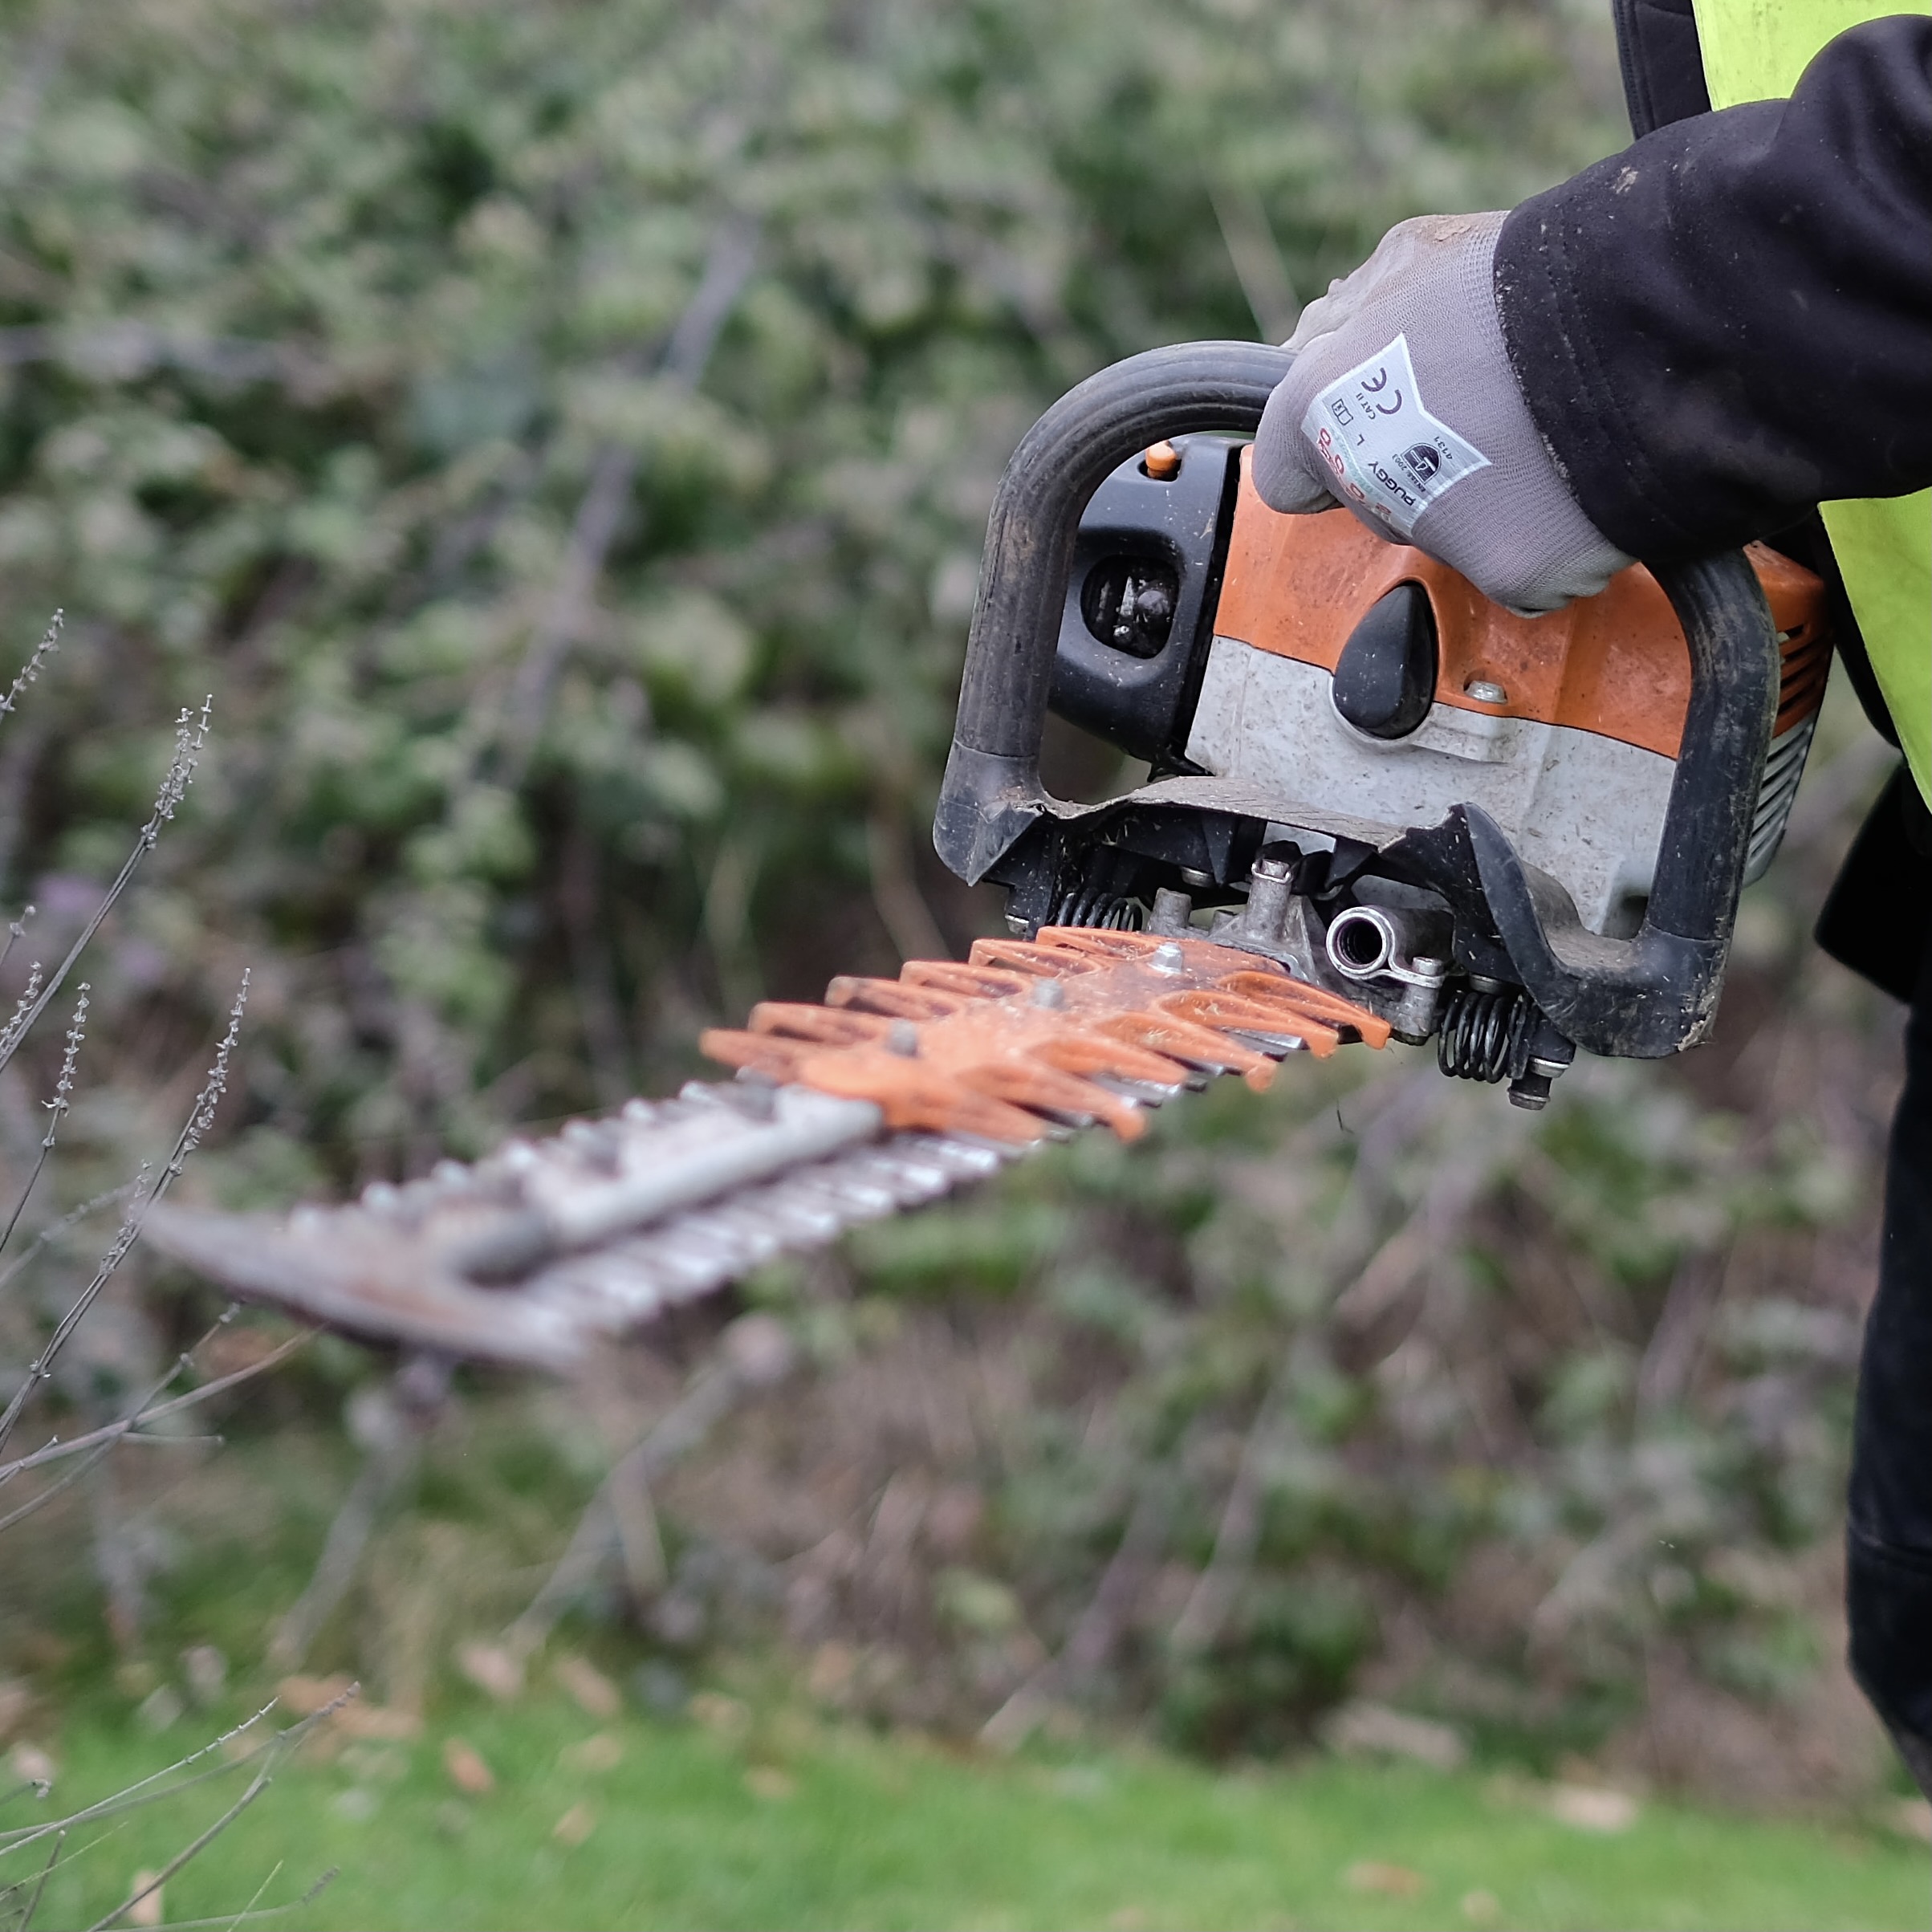 Cutting a hedge with a hedge trimmer